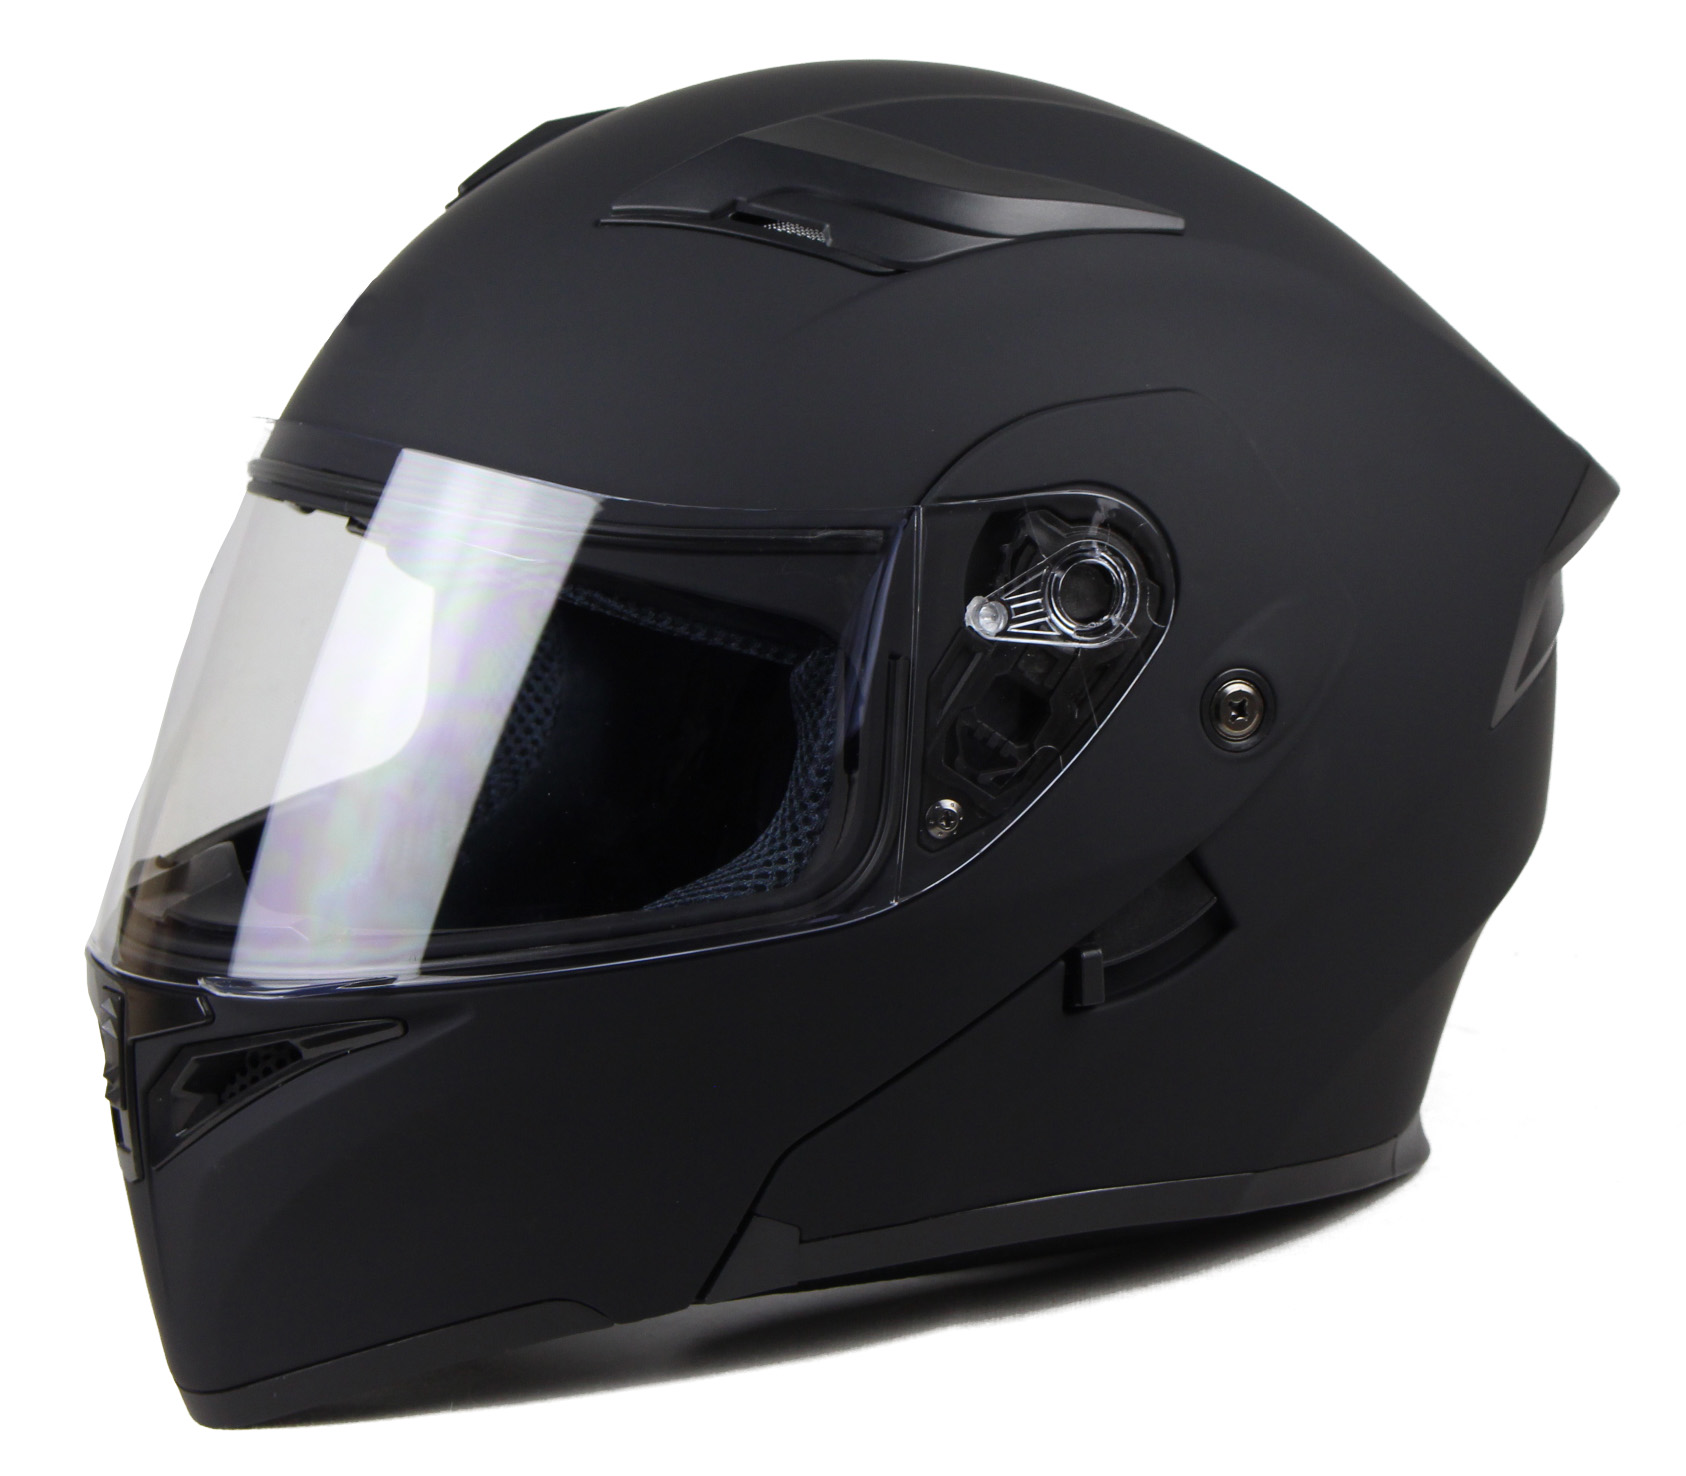 New Modular Helmet Offers Advanced Features and Enhanced Safety in China